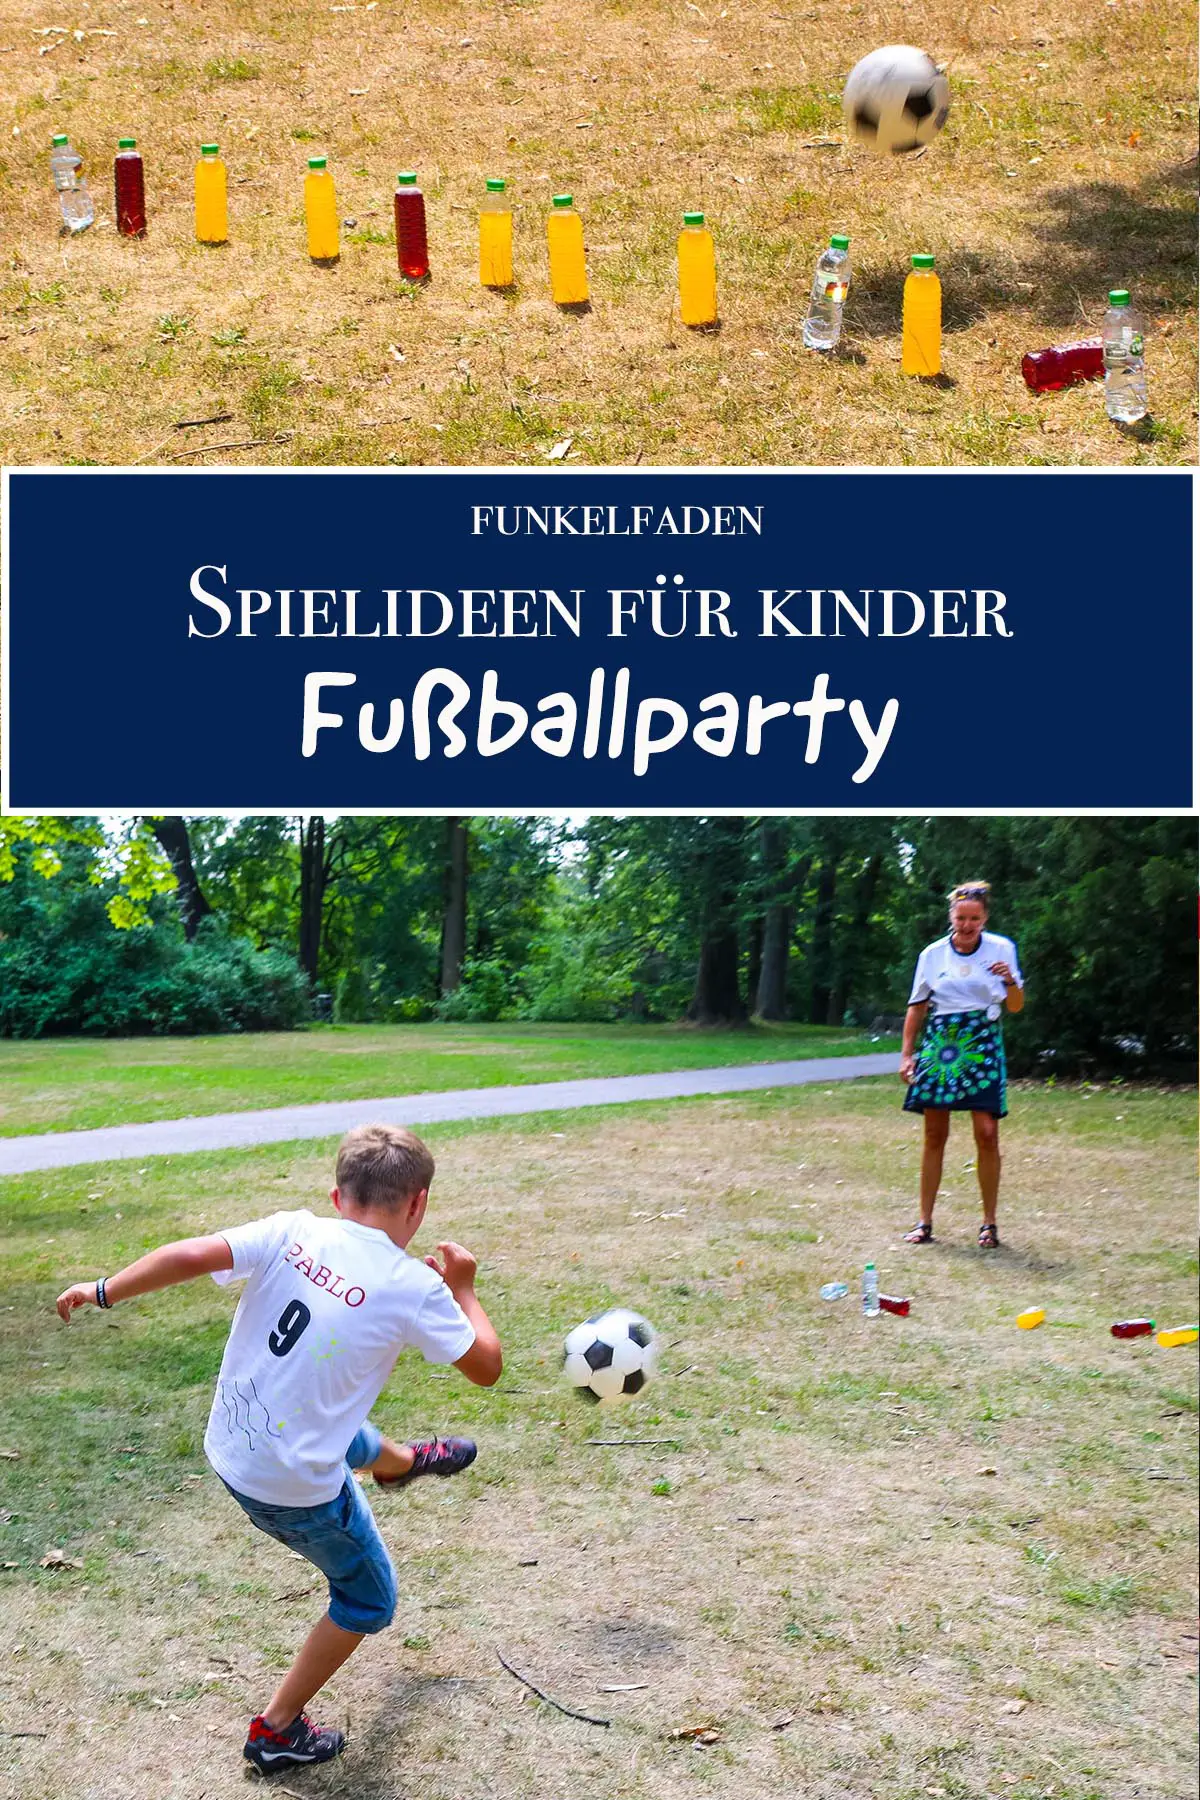 6 Fußball Party Tröten  Fußball party, Party, Fussball